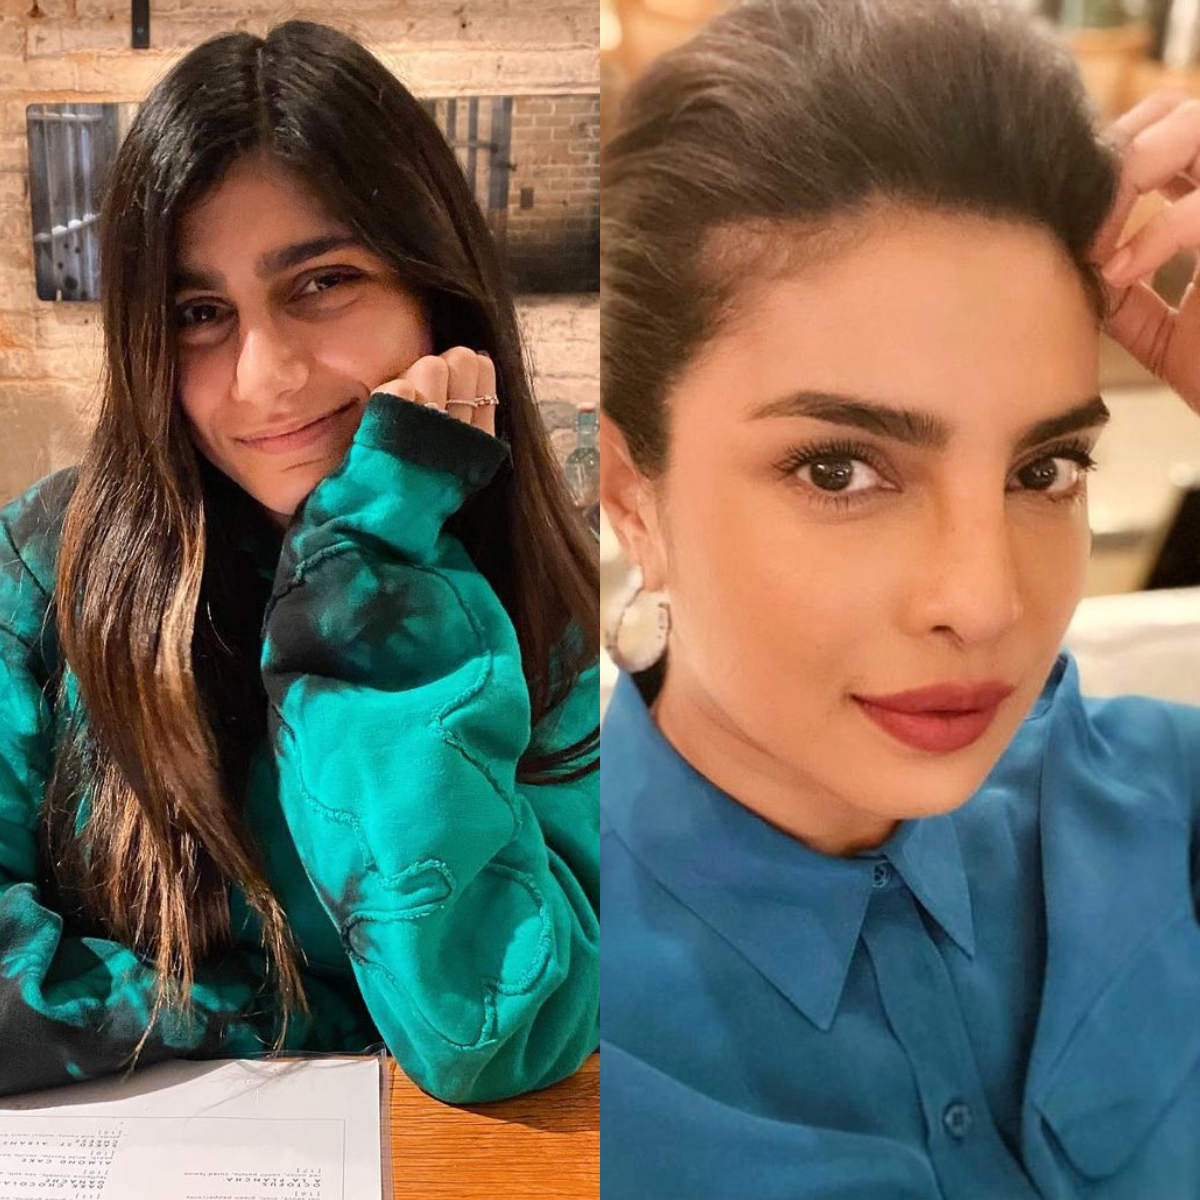 Mia Khalifa takes a jibe at Priyanka Chopra for silence on farmers'  protests: Is Mrs. Jonas going to chime in? | PINKVILLA